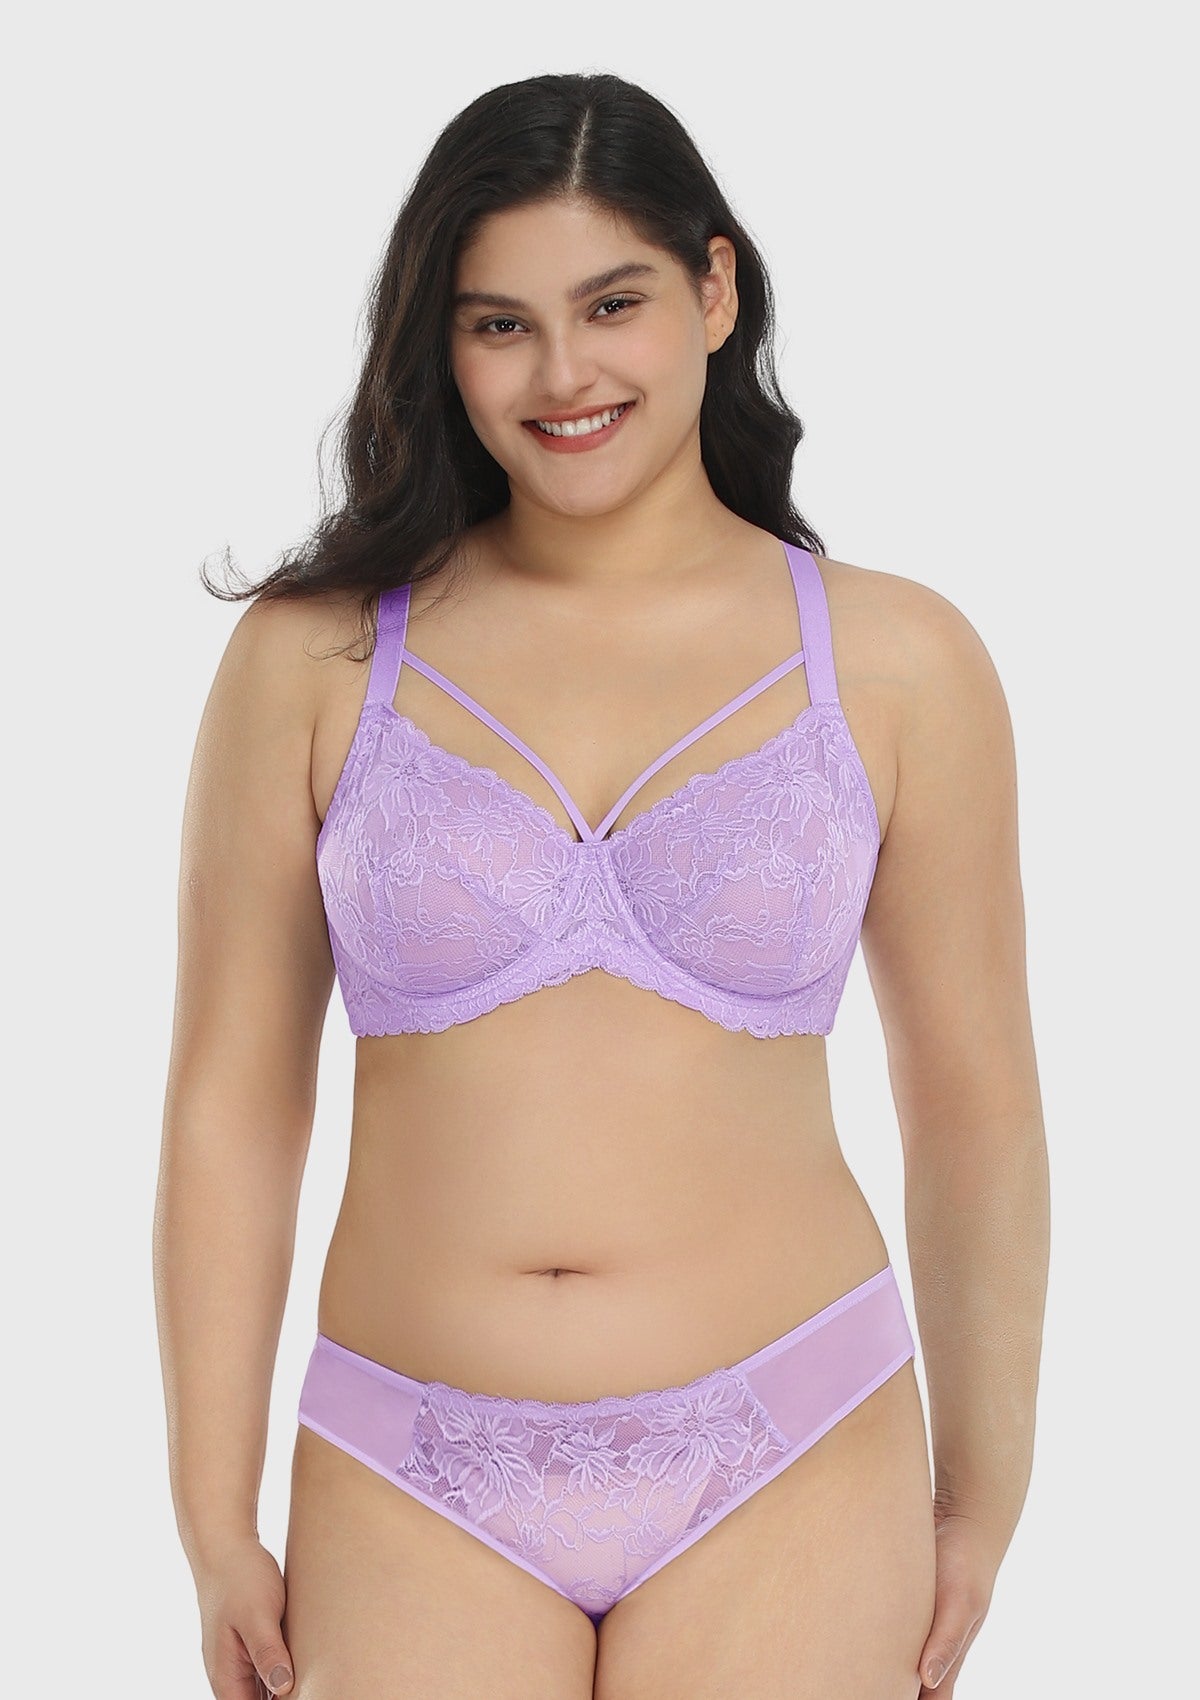 HSIA Pretty In Petals See-Through Lace Bra: Lift And Separate - Purple / 38 / D